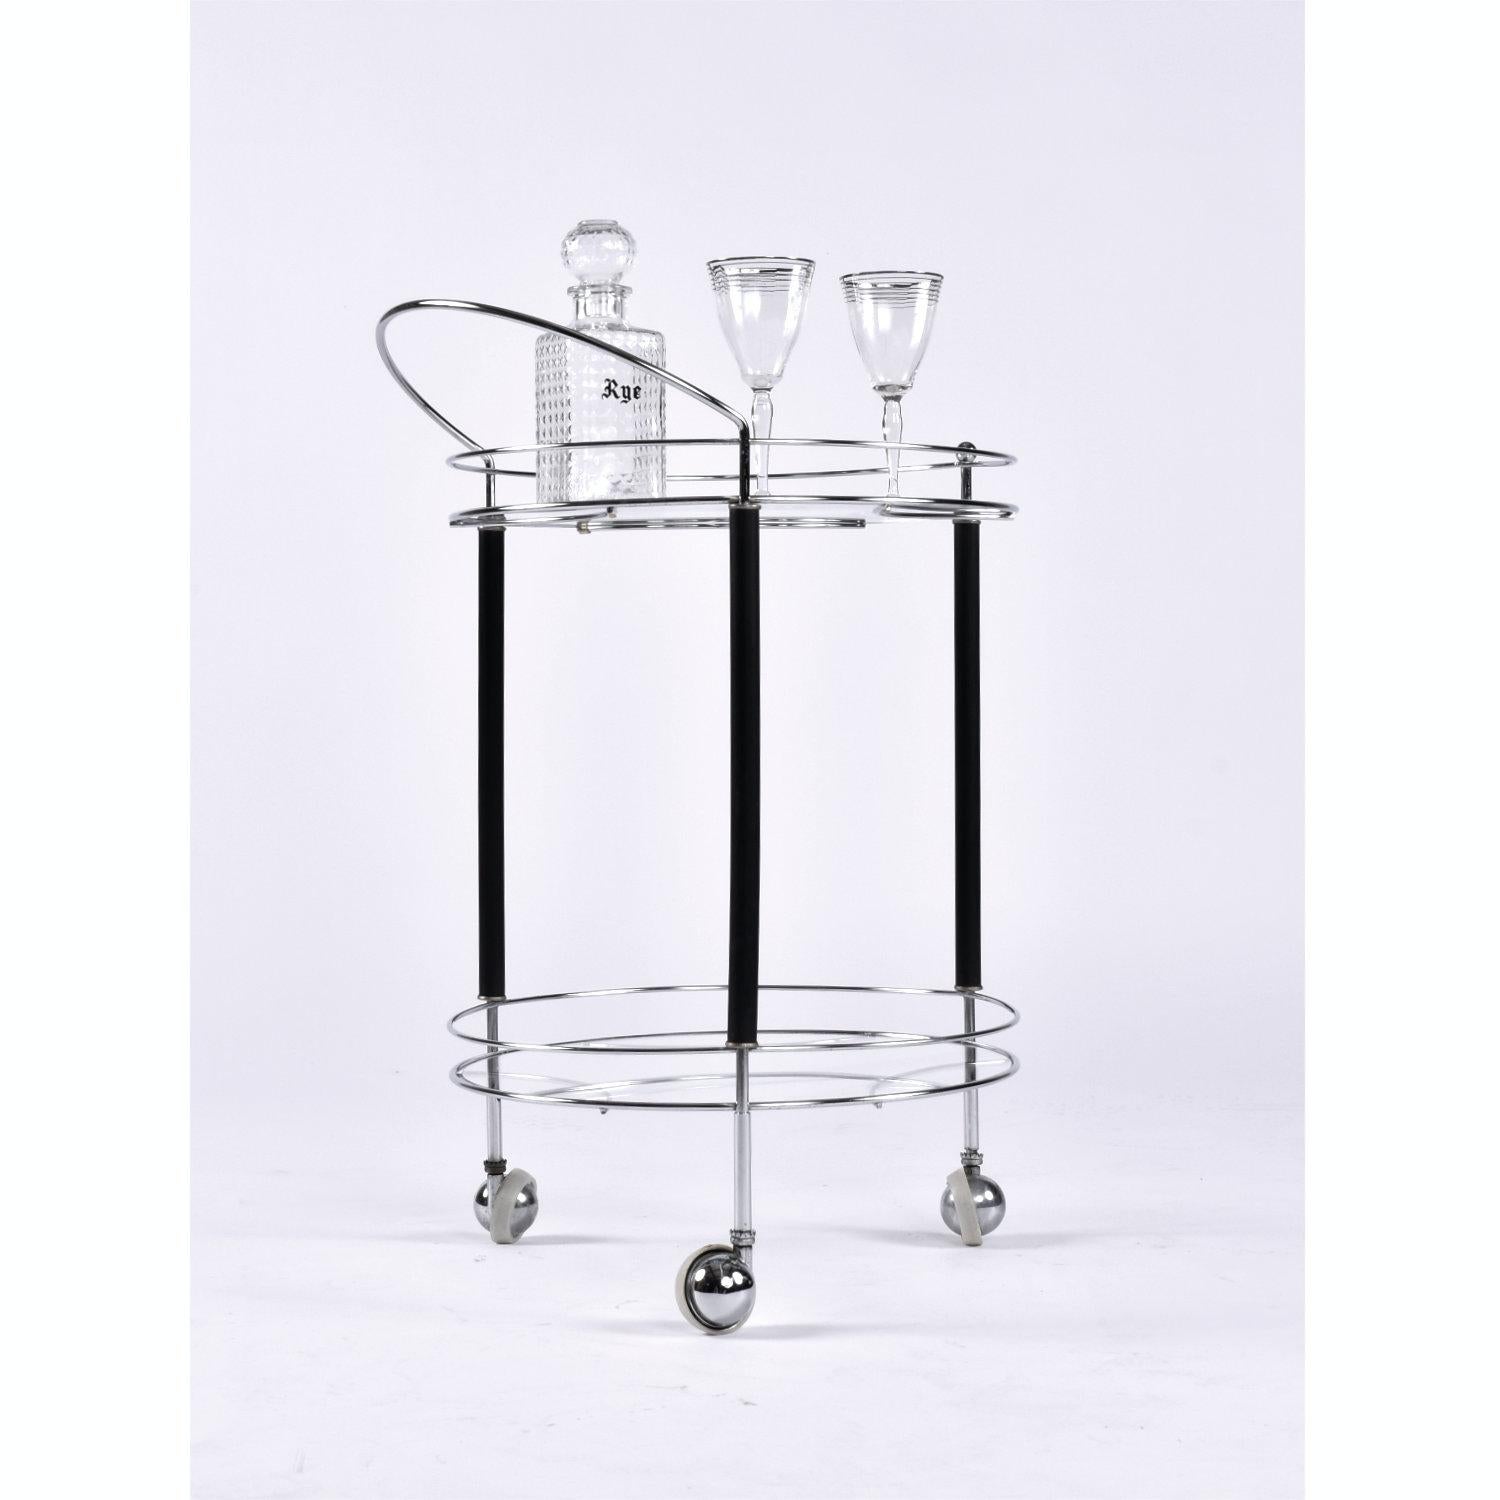 Sleek chrome, black and glass round bar cart on wheels. This piece captures elements of Art Deco, Machine Age and mid-century modern design. Dating from the early 1950s, one can see the layover from earlier aesthetic movements. The chrome finish